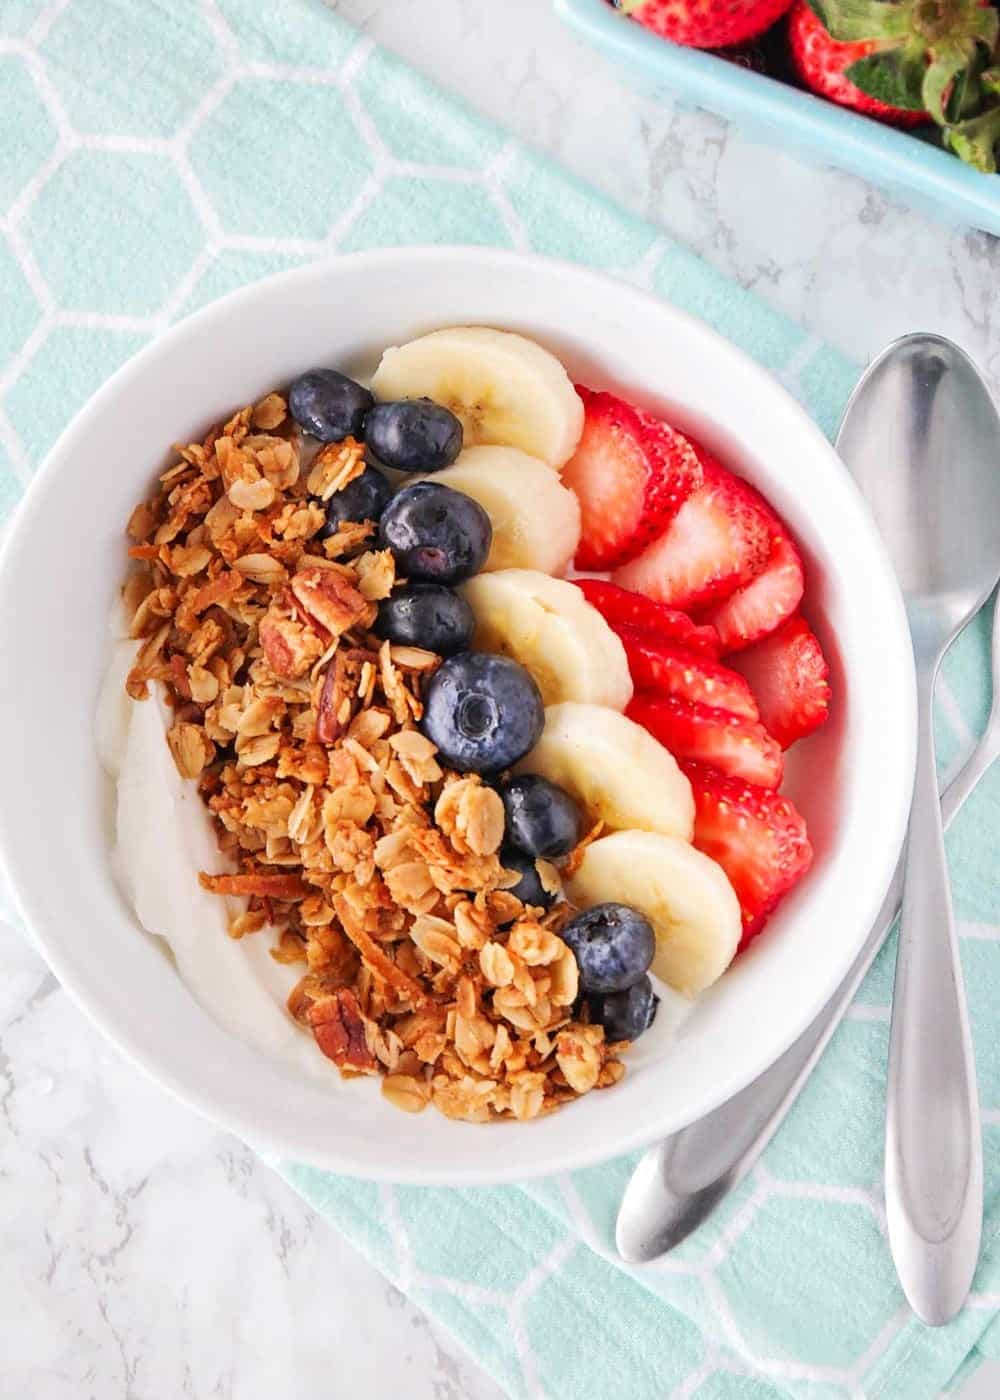 Bowl of yogurt topped with homemade granola and fresh fruit.